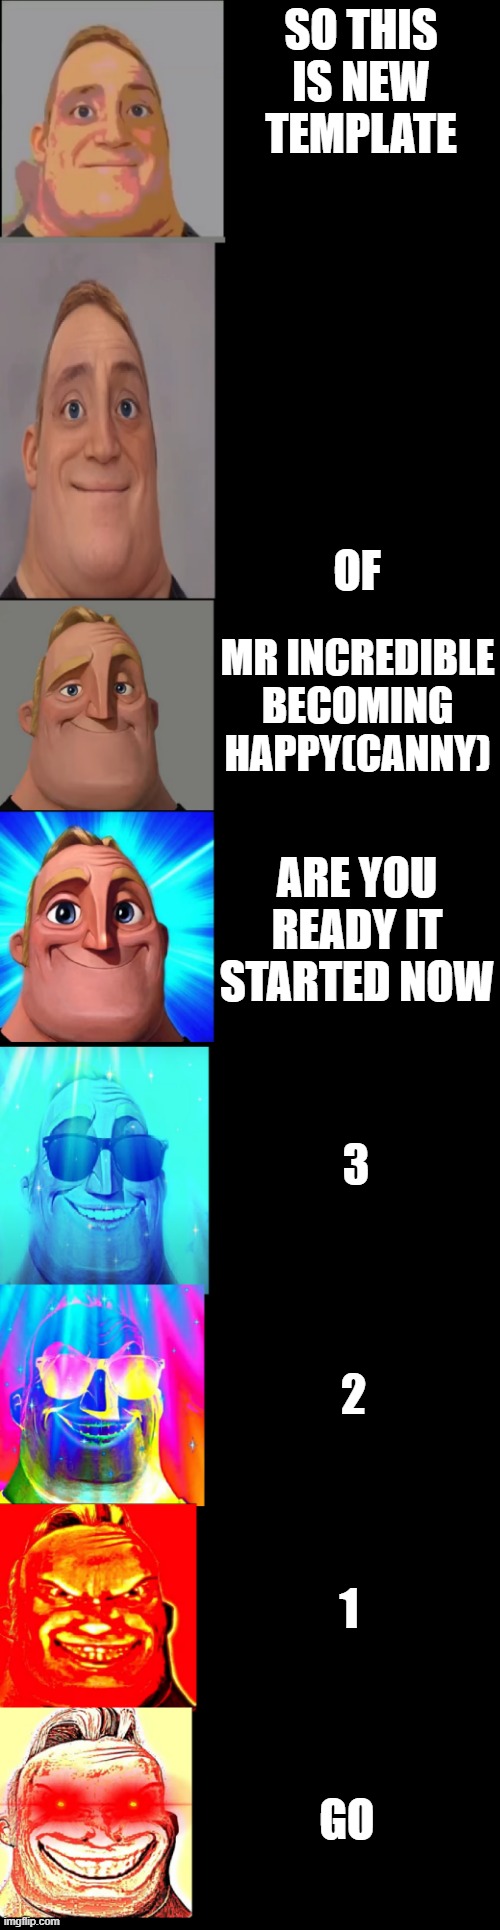 mr incredible becoming happy(canny) is here https://imgflip.com/memegenerator/394623750/mr-incredible-becoming-happycanny | SO THIS IS NEW TEMPLATE; OF; MR INCREDIBLE BECOMING HAPPY(CANNY); ARE YOU READY IT STARTED NOW; 3; 2; 1; GO | image tagged in mr incredible becoming happy canny | made w/ Imgflip meme maker